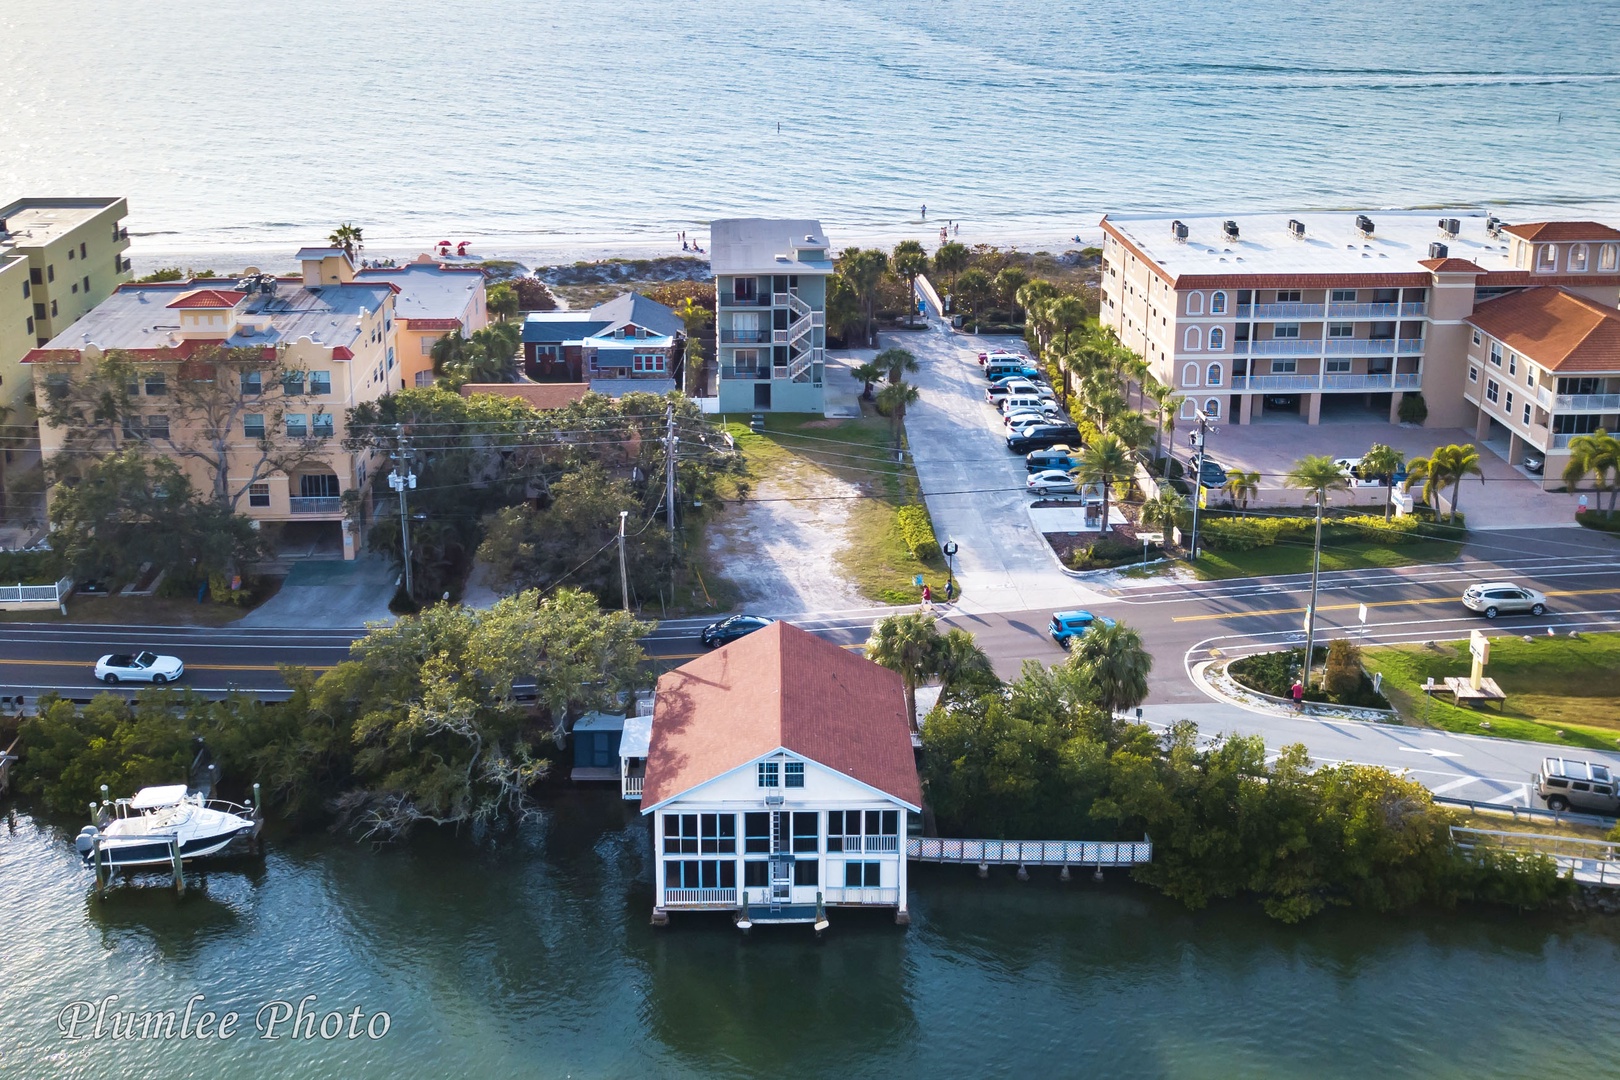 The Gulf of Mexico beach is a short walk from The Historic Boathouse.